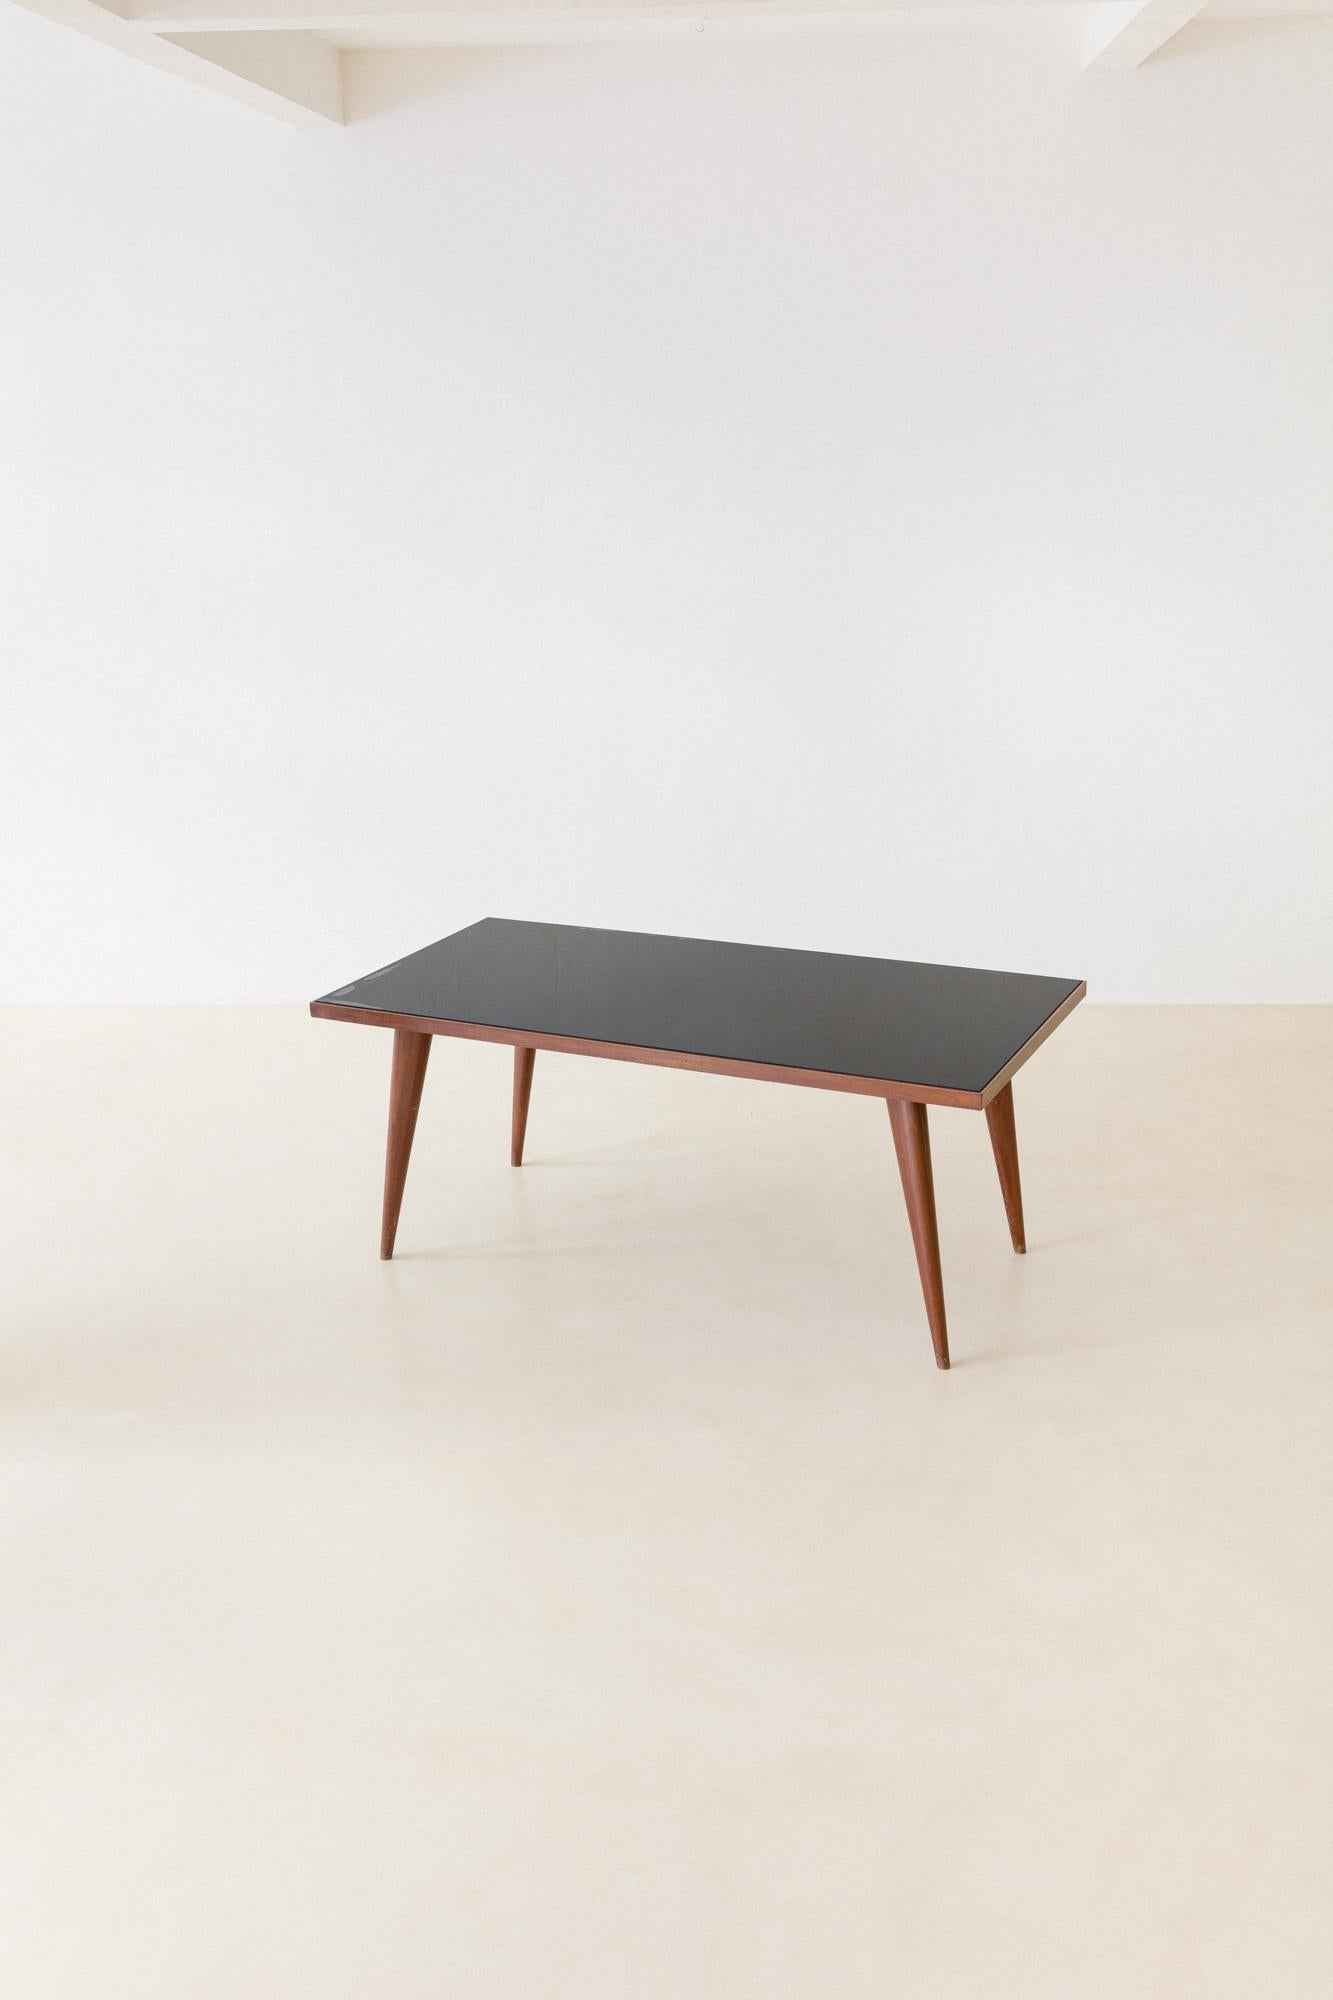 Mid-20th Century Rosewood Dining Table with Glass Top, Joaquim Tenreiro, 1947, Midcentury Brazil For Sale